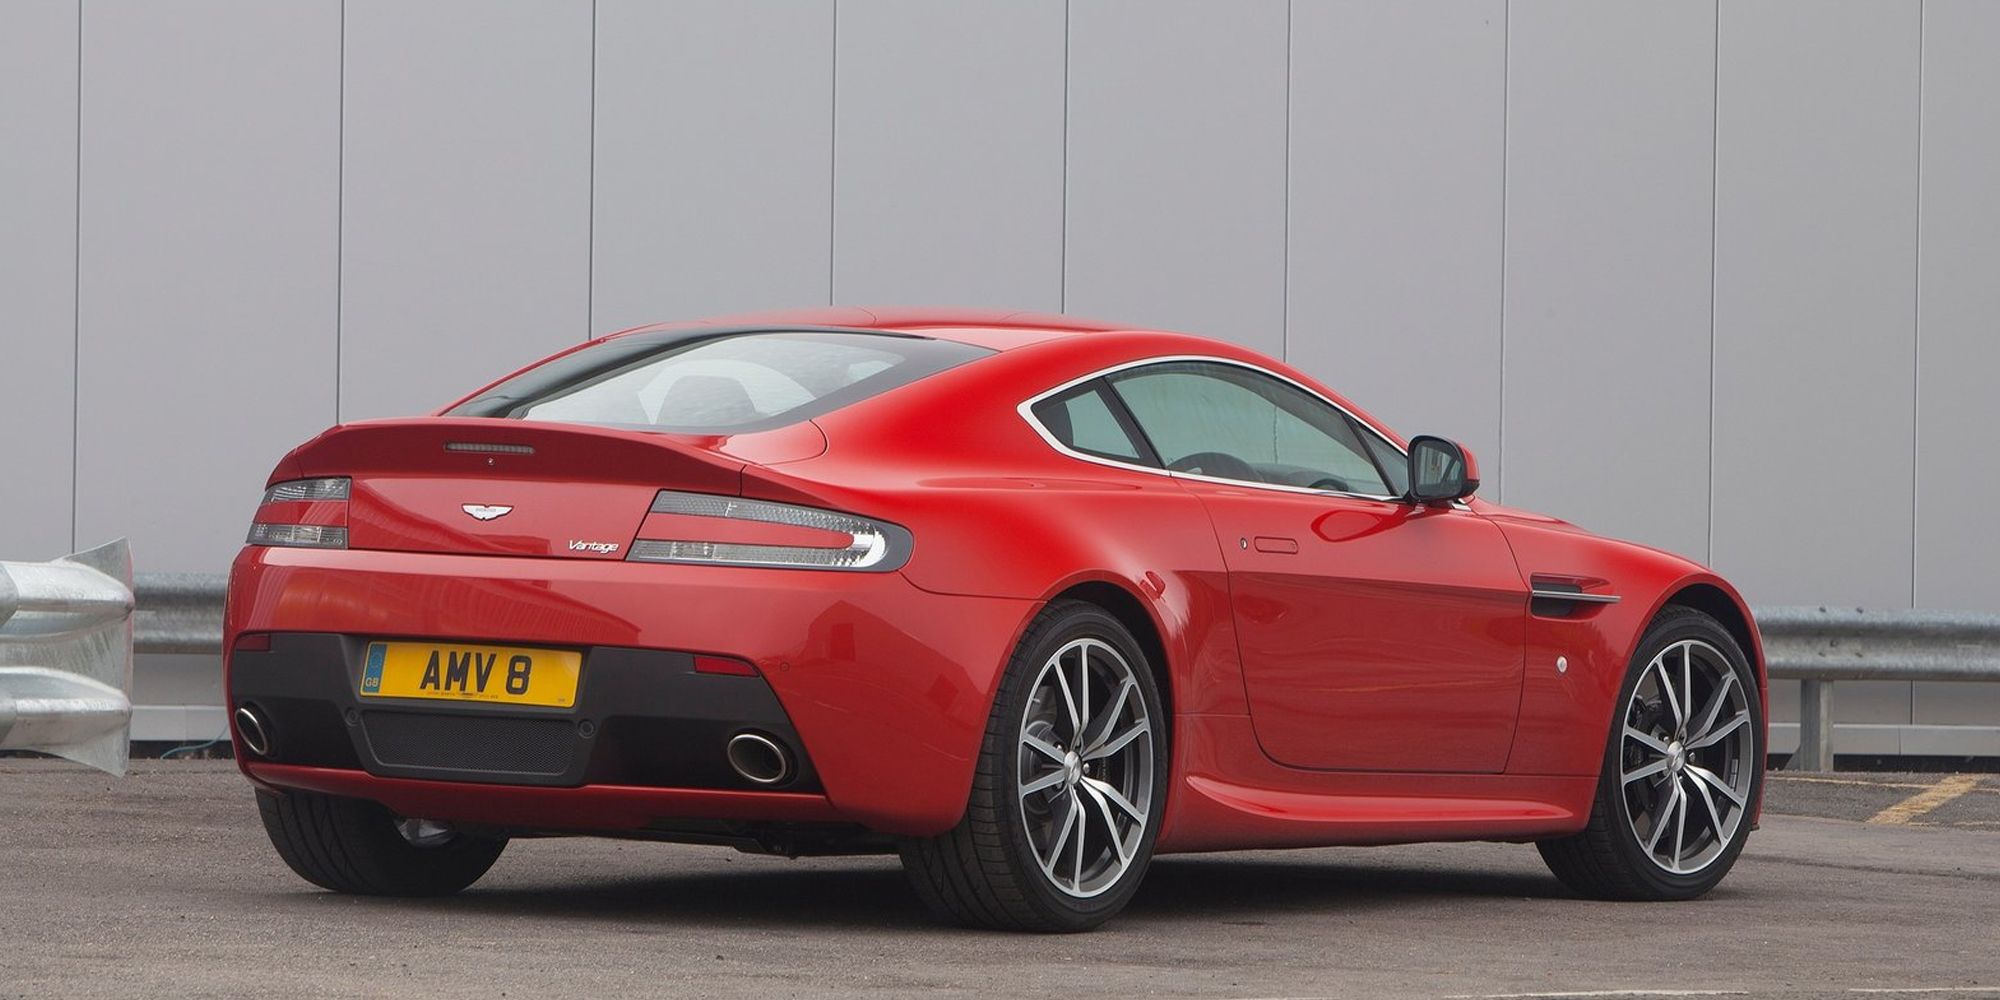 Rear 3/4 view of a red V8 Vantage